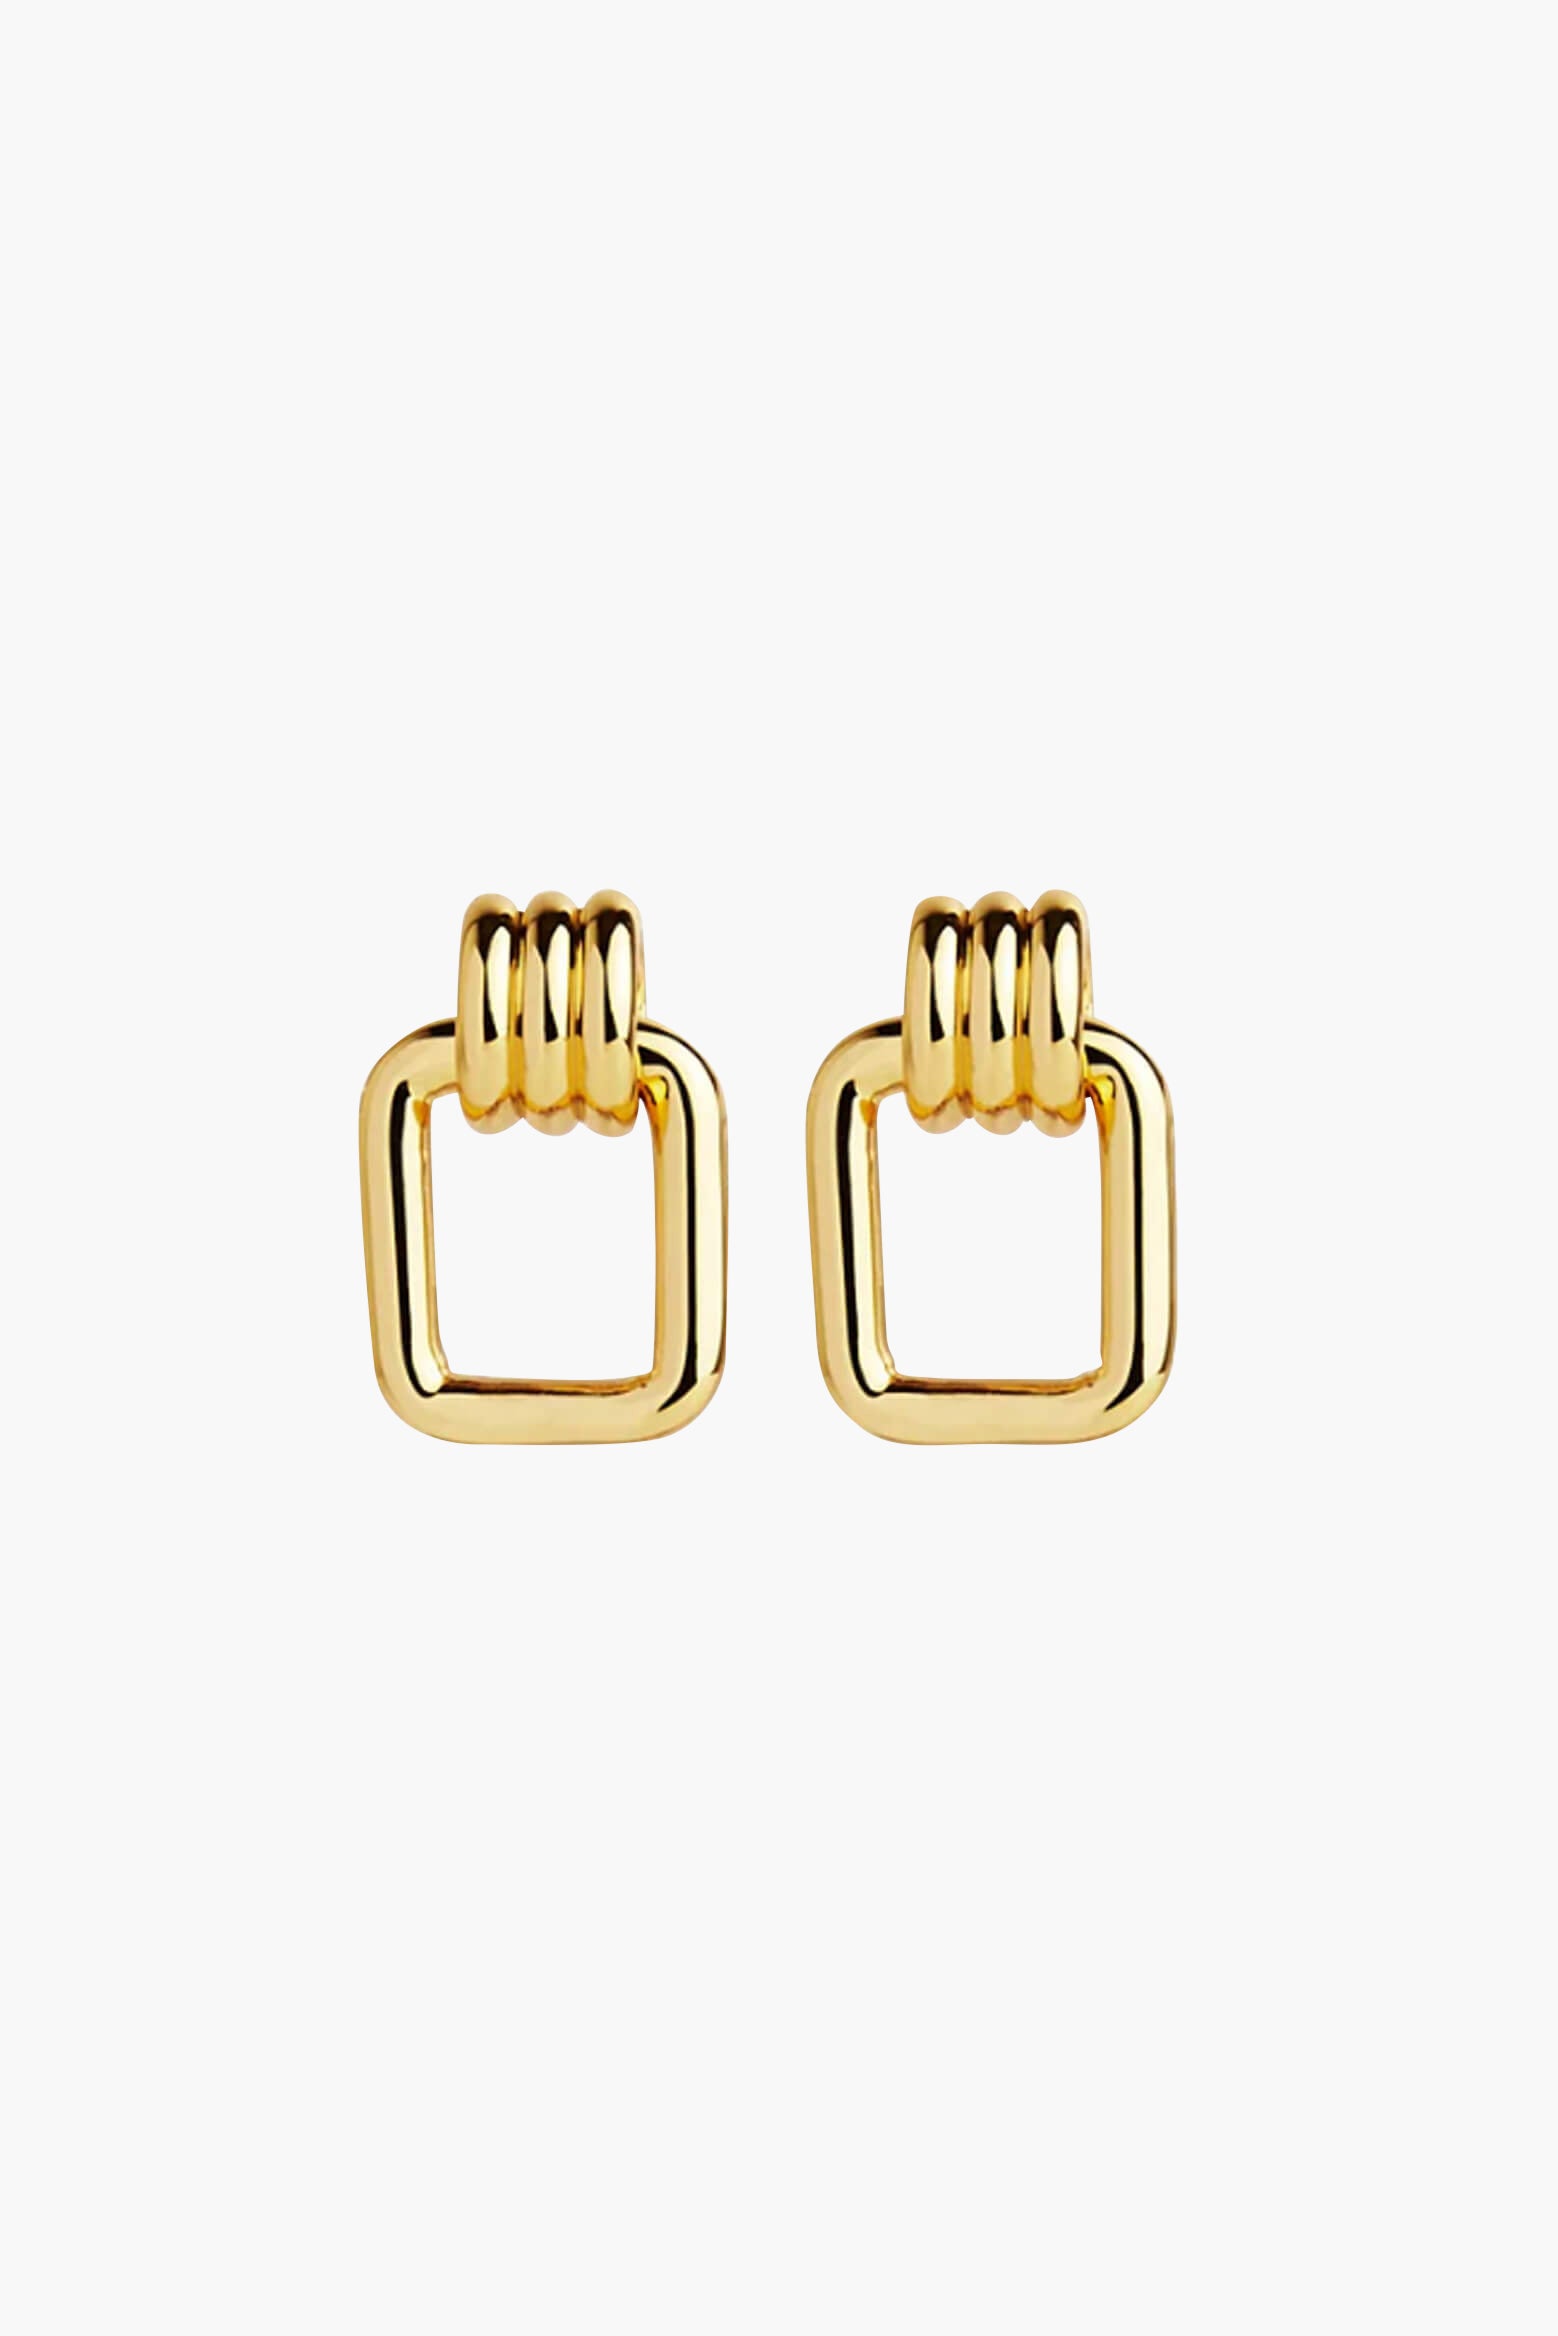 Rylan Flat Link Earring available at The New Trend